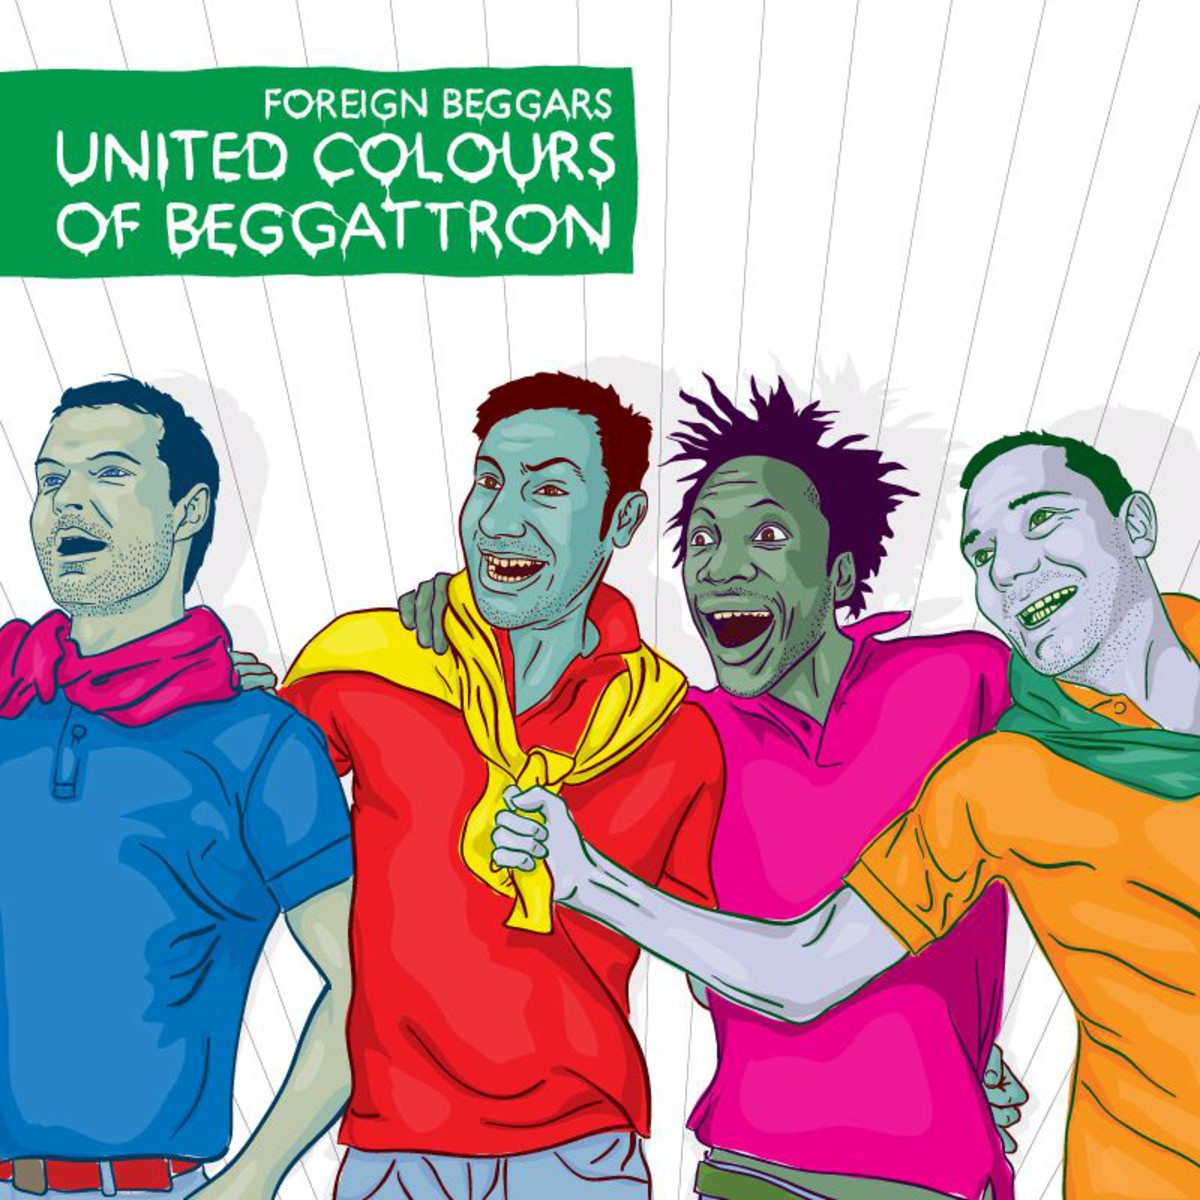 United Colours of Beggattron